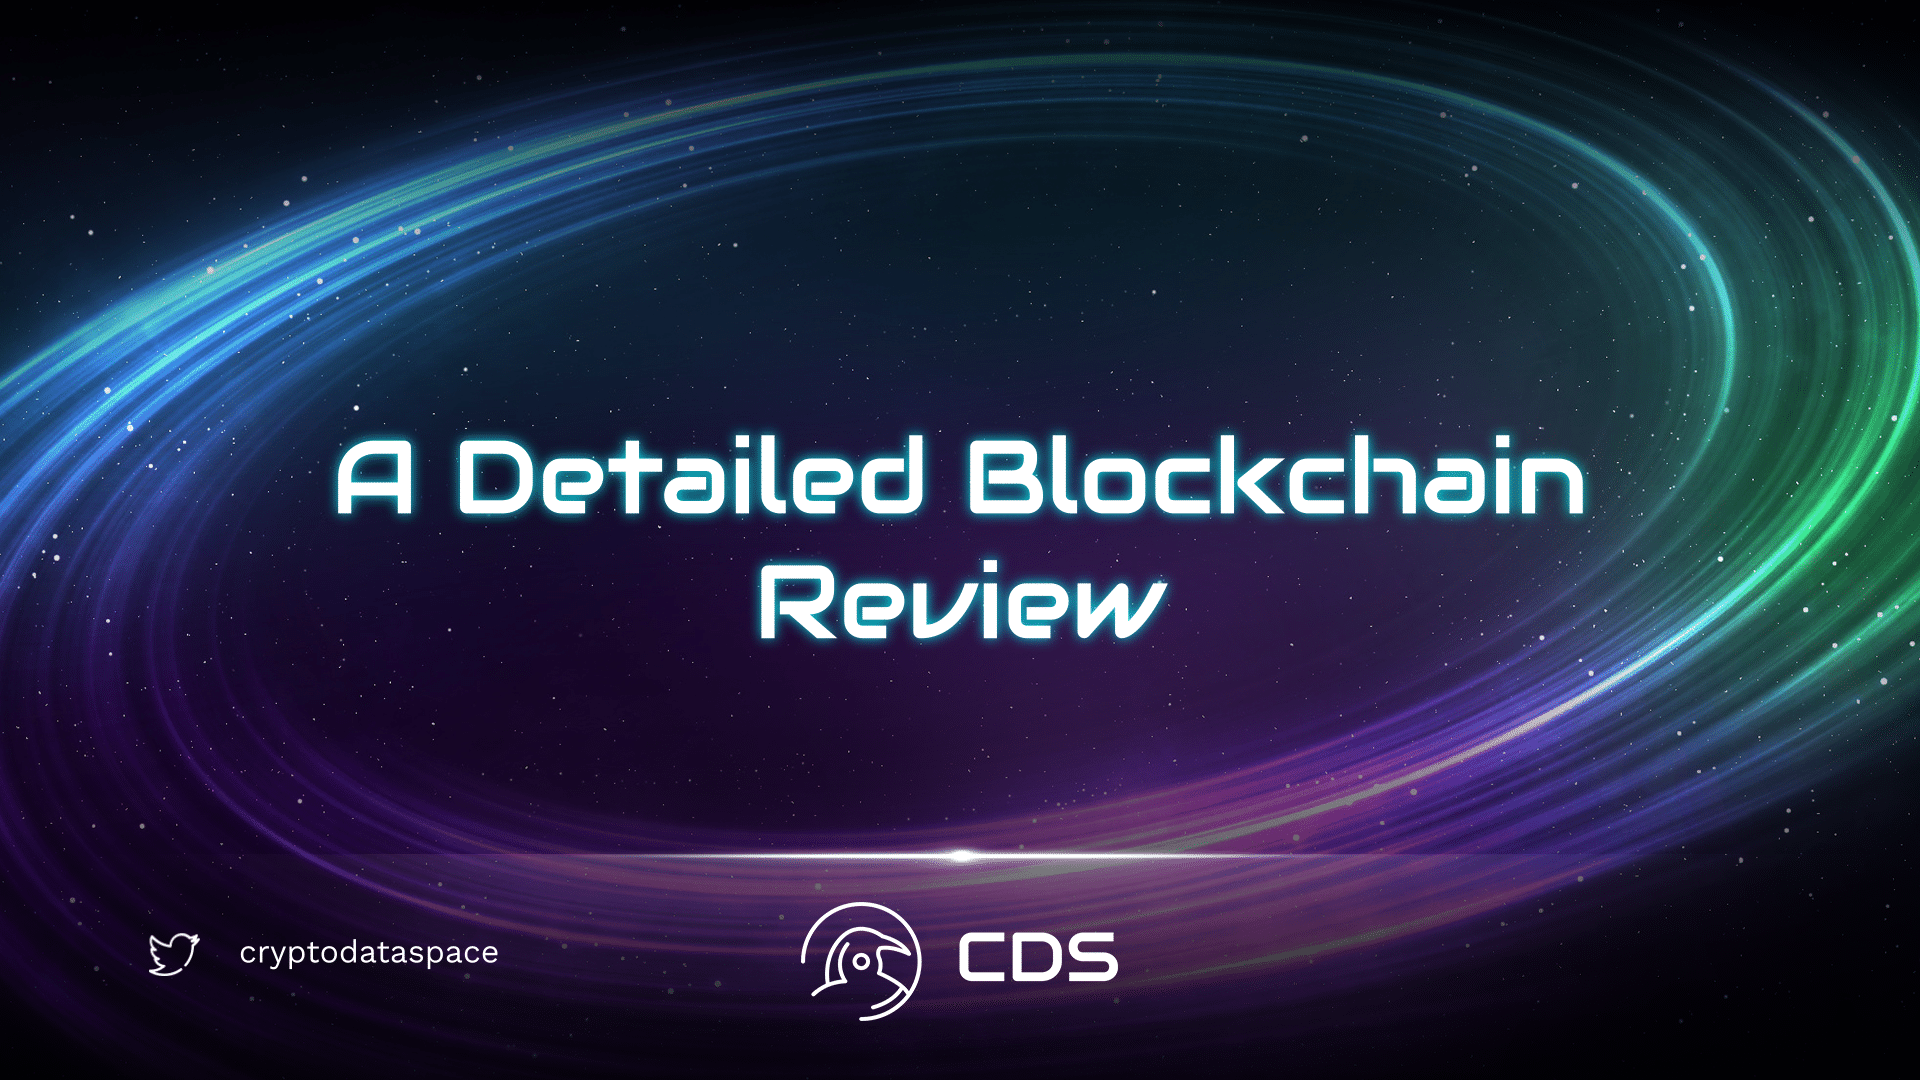 A Detailed Blockchain Review